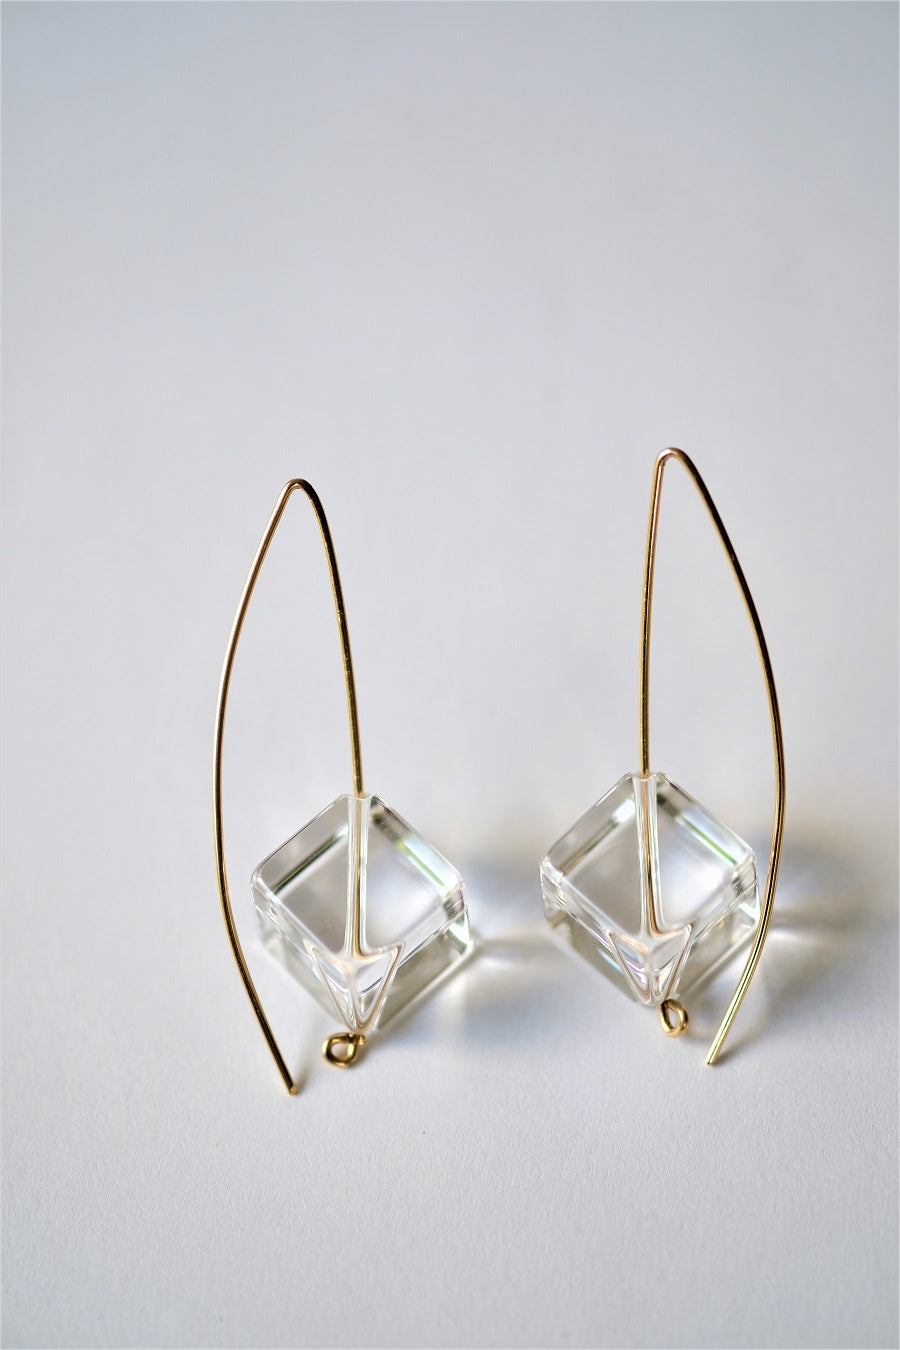 Rock Crystal Cubes on 14k gold filled Wire Earrings